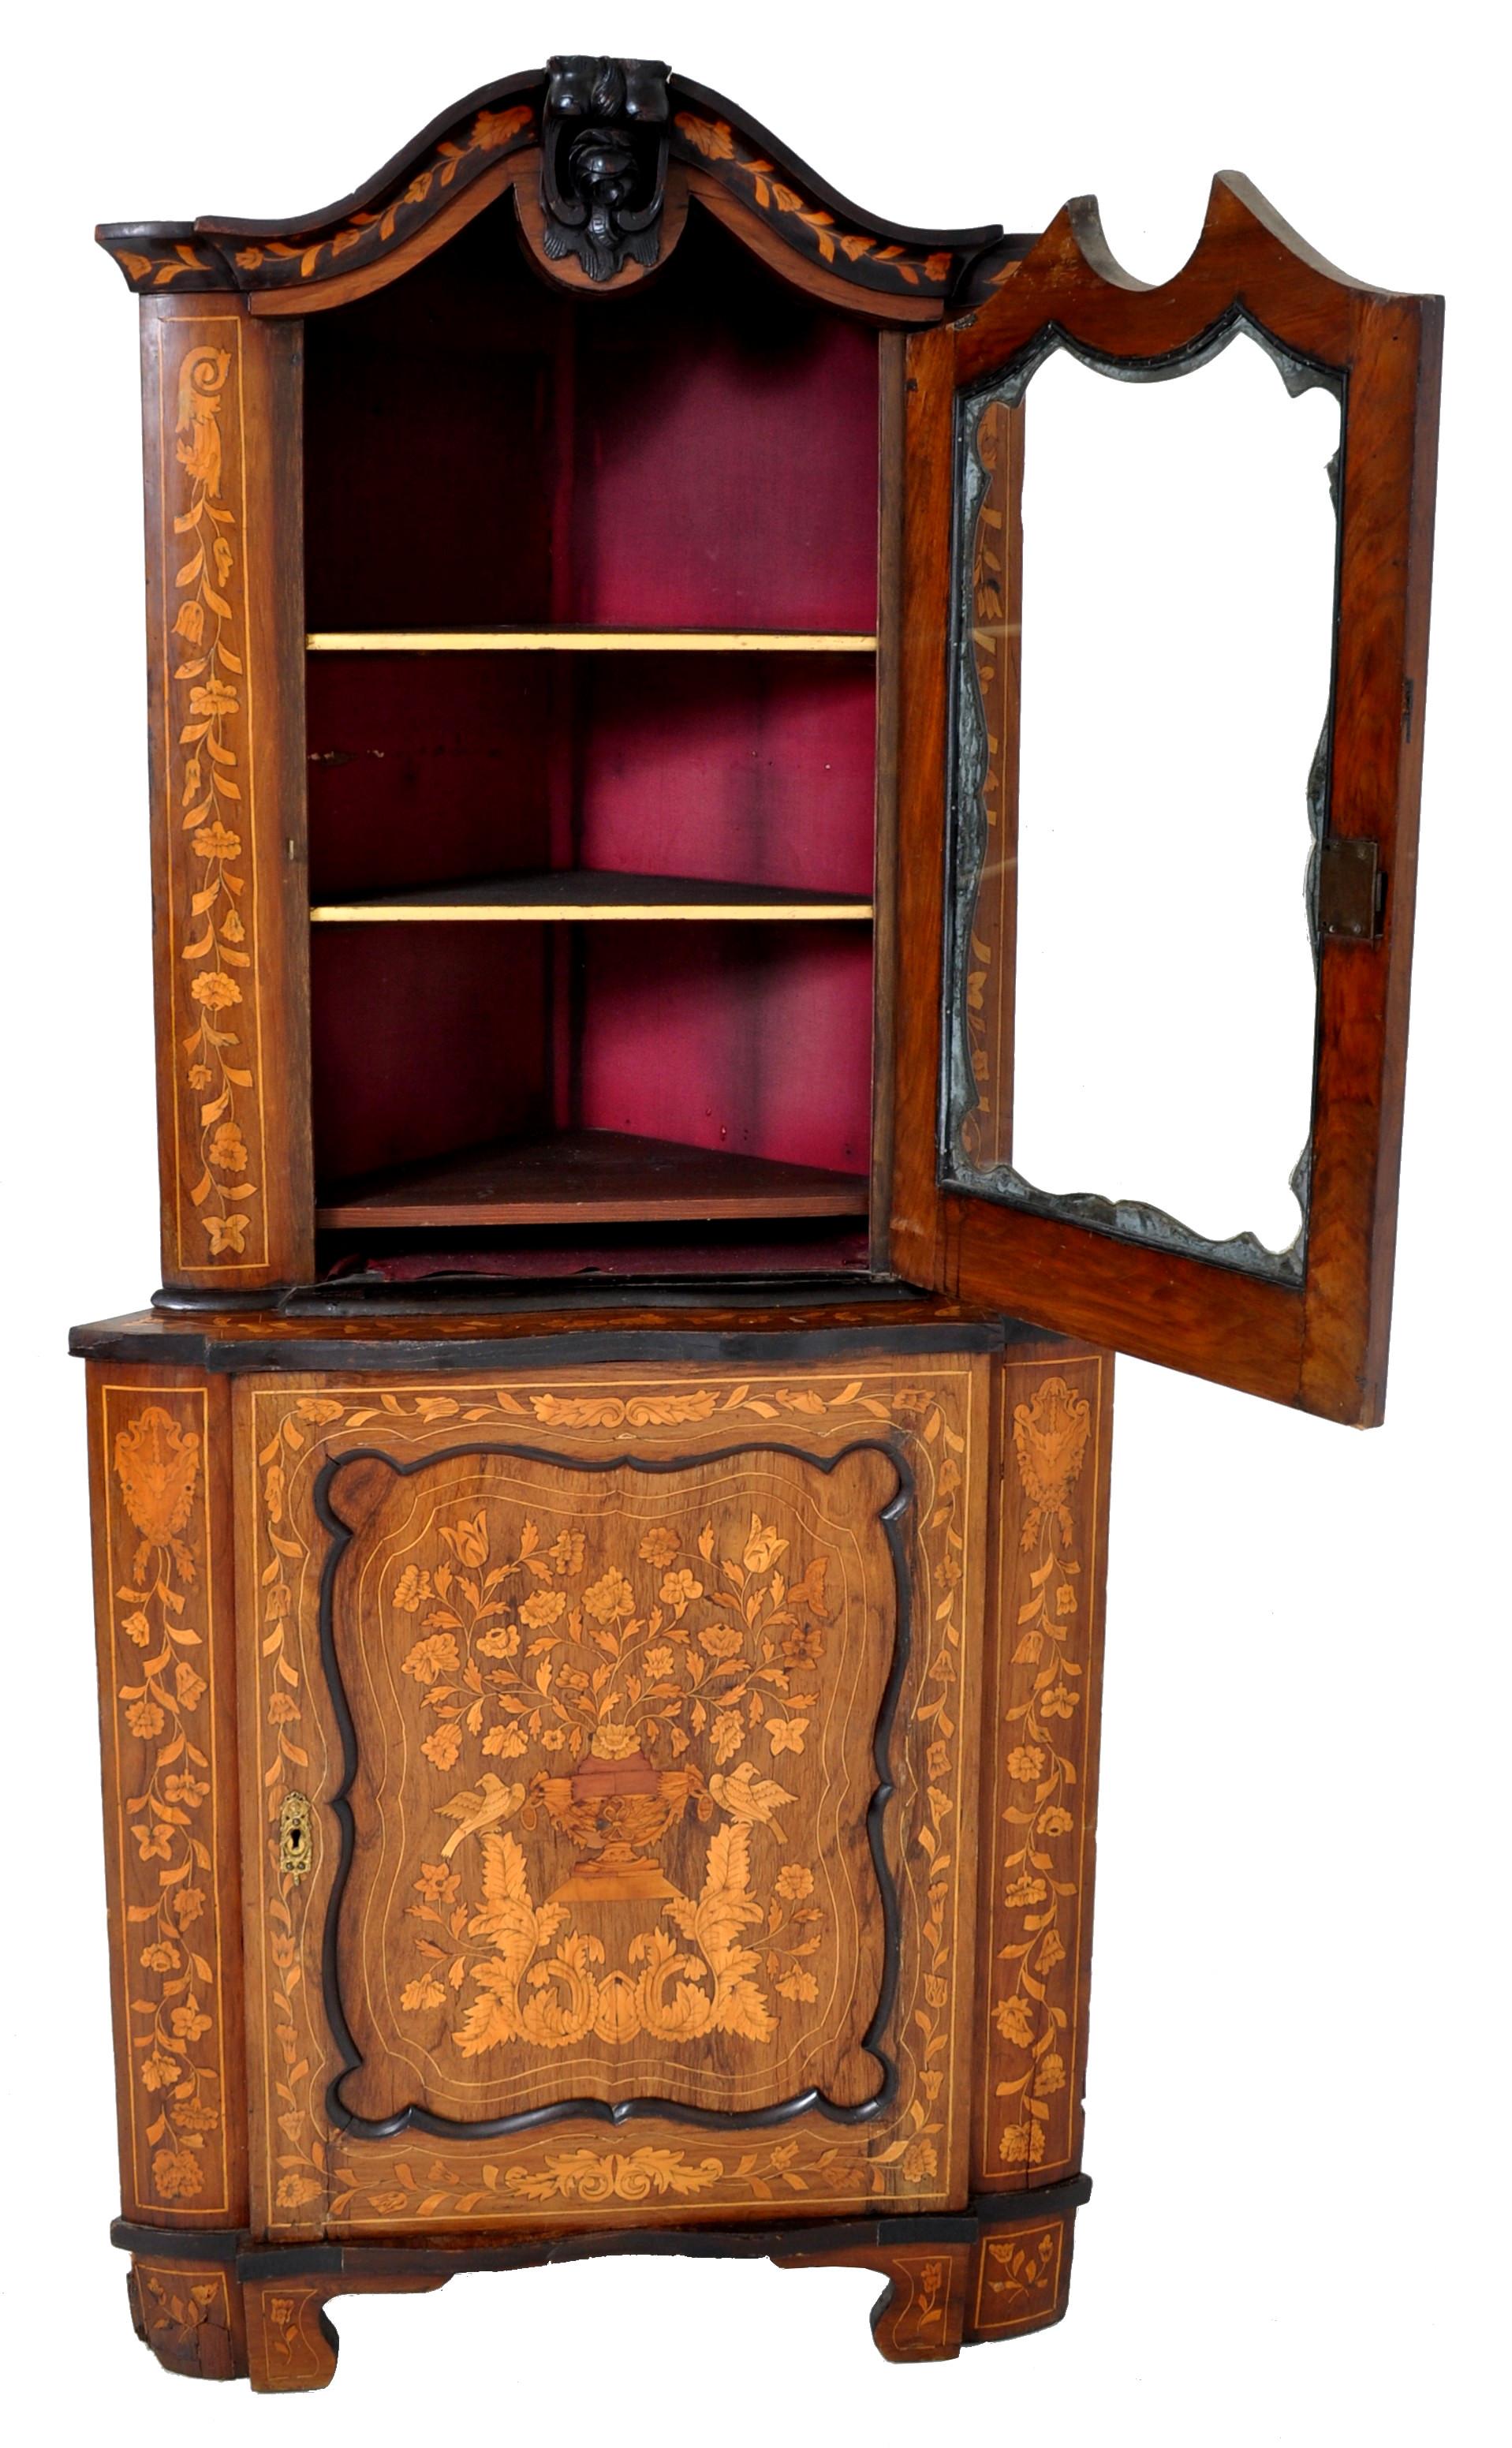 Antique inlaid marquetry Dutch two-piece corner cabinet, circa 1830. The cabinet with an arched top with a carved floral finial to the center, the top section having a single door enclosing two shelves, the base also having a single door enclosing